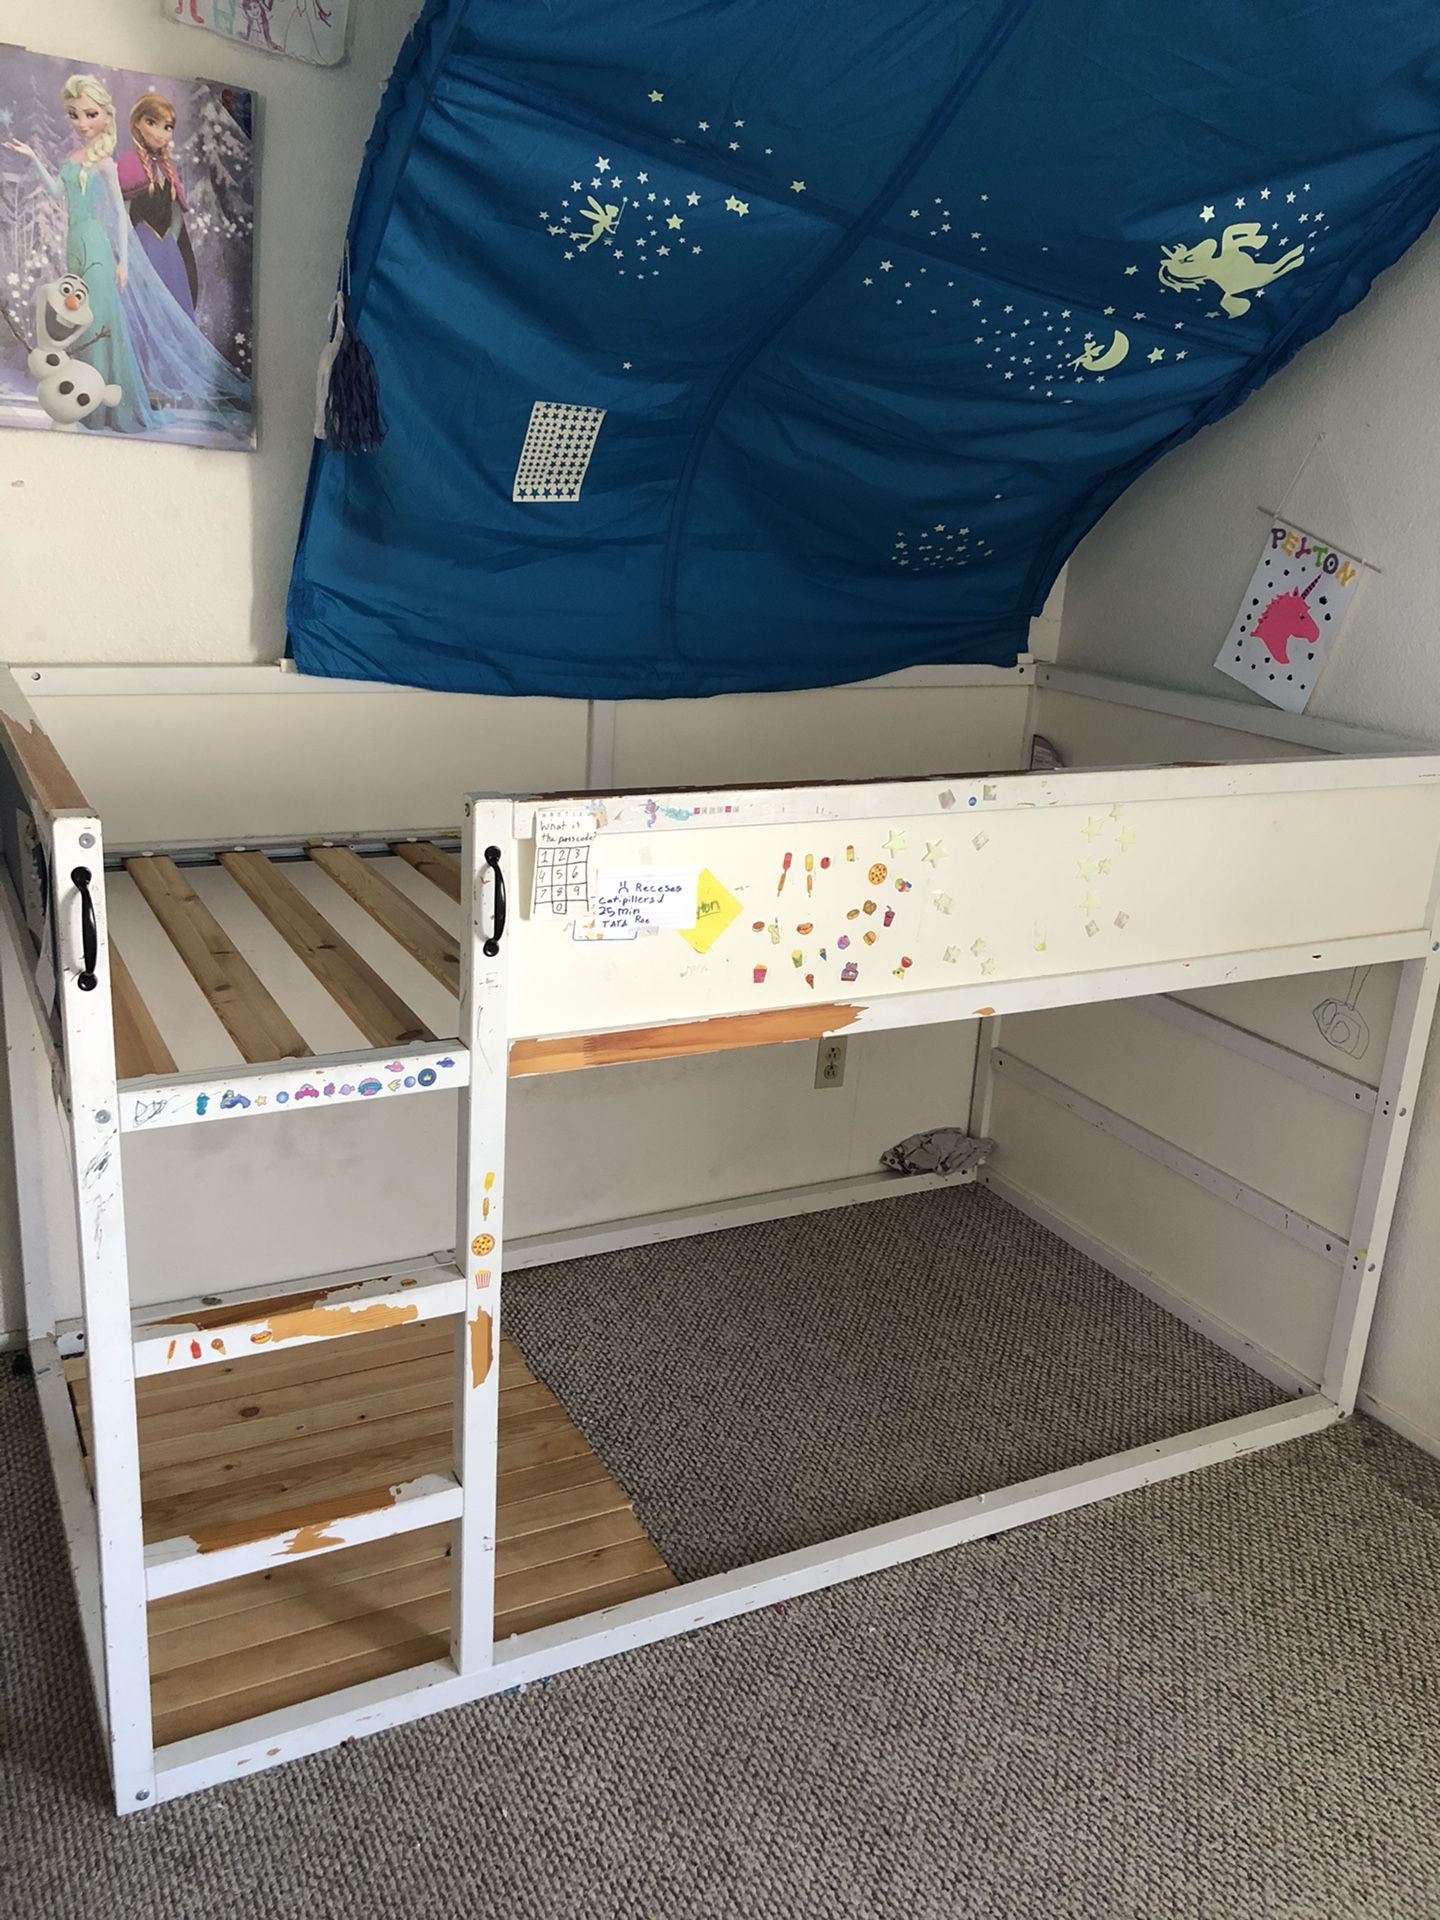 Free wooden bunk bed. Just need repaint.